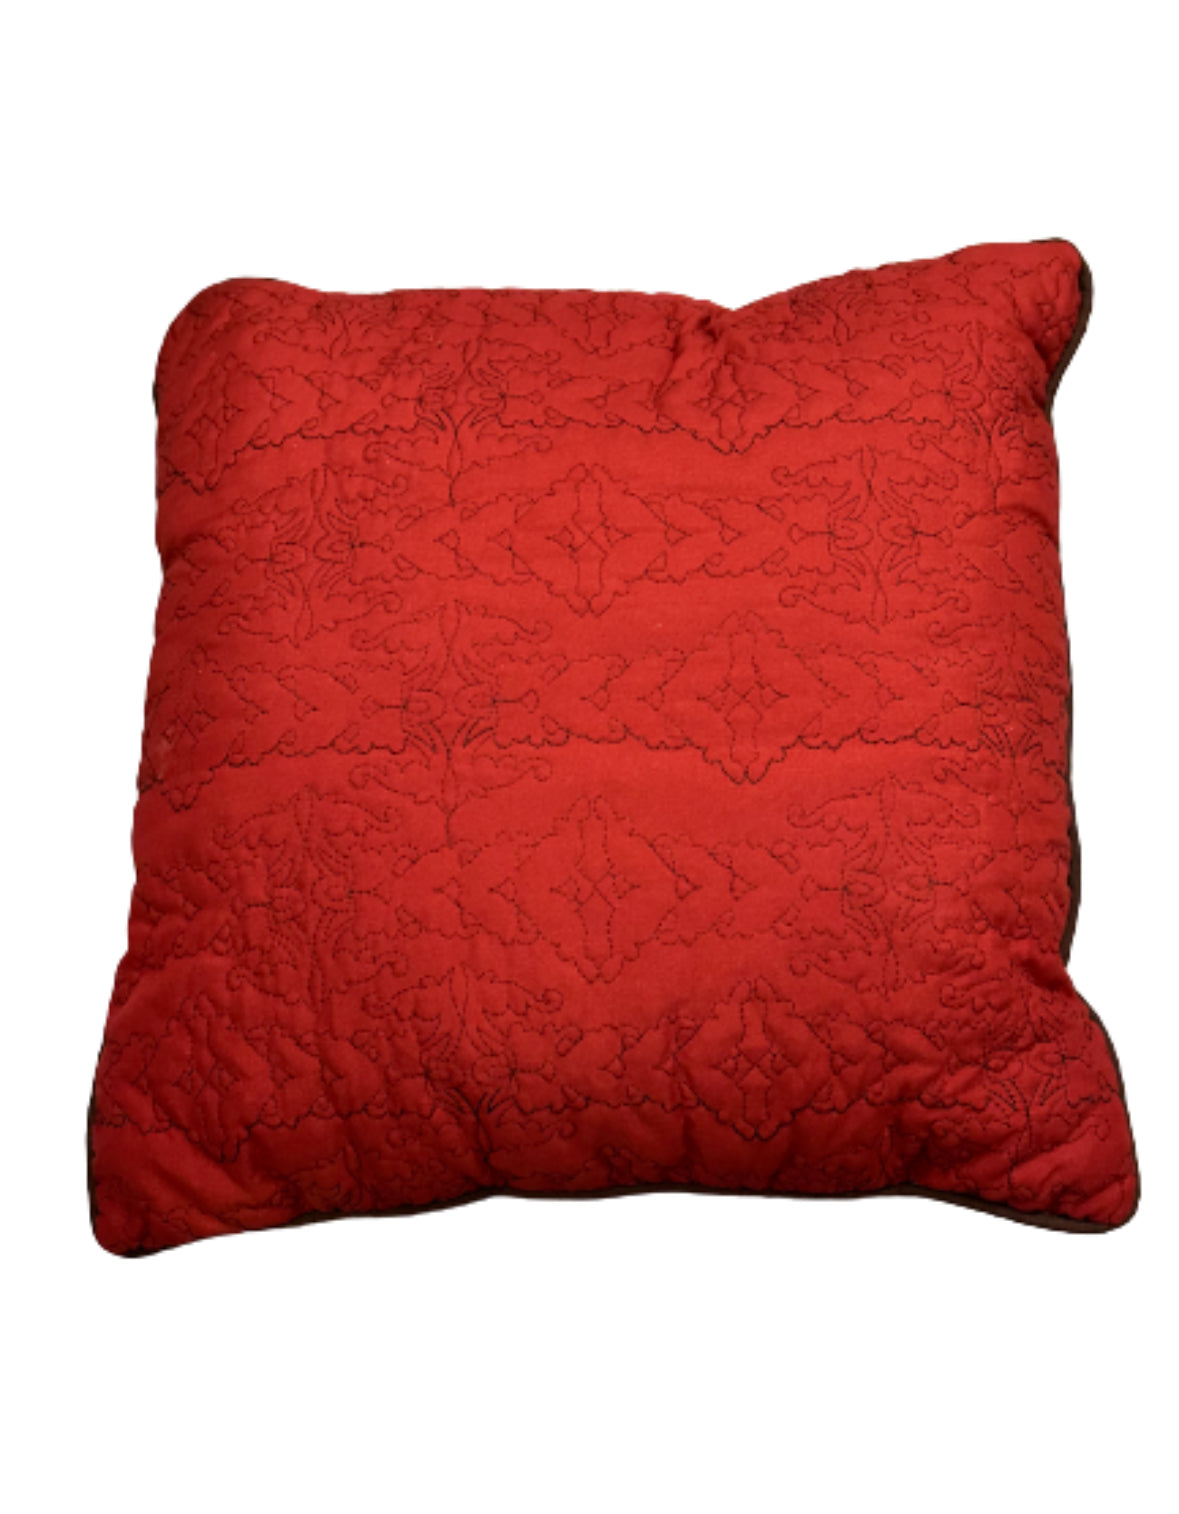 MAD MEN: Don’s Vintage Embroidered Pillow